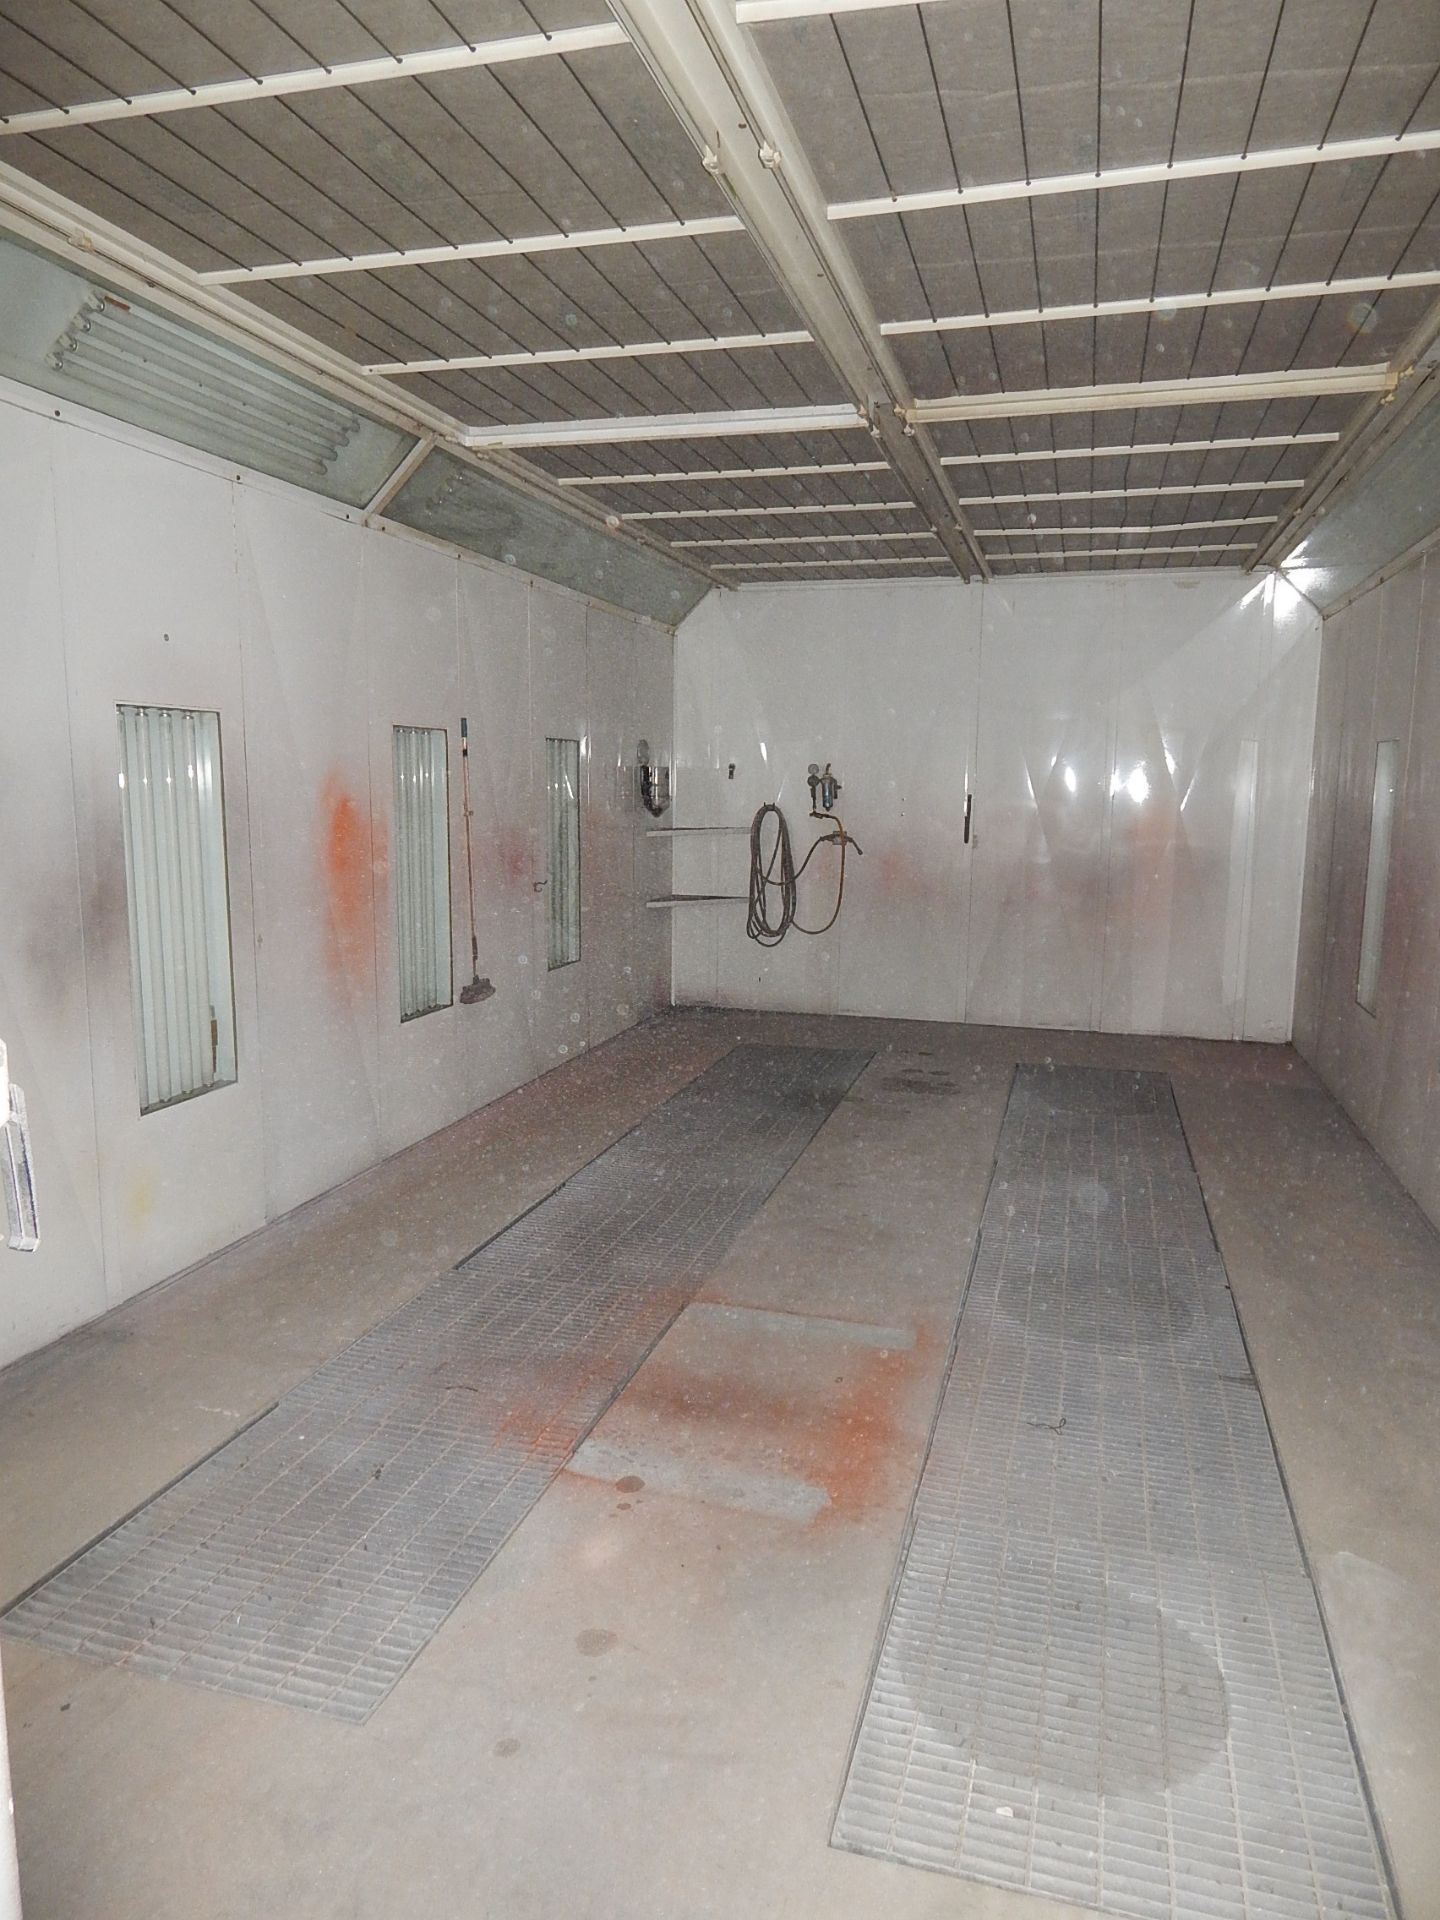 DEVILBISS 25' X 12' CONCEPT CURE PAINT BOOTH (CI) - Image 2 of 2